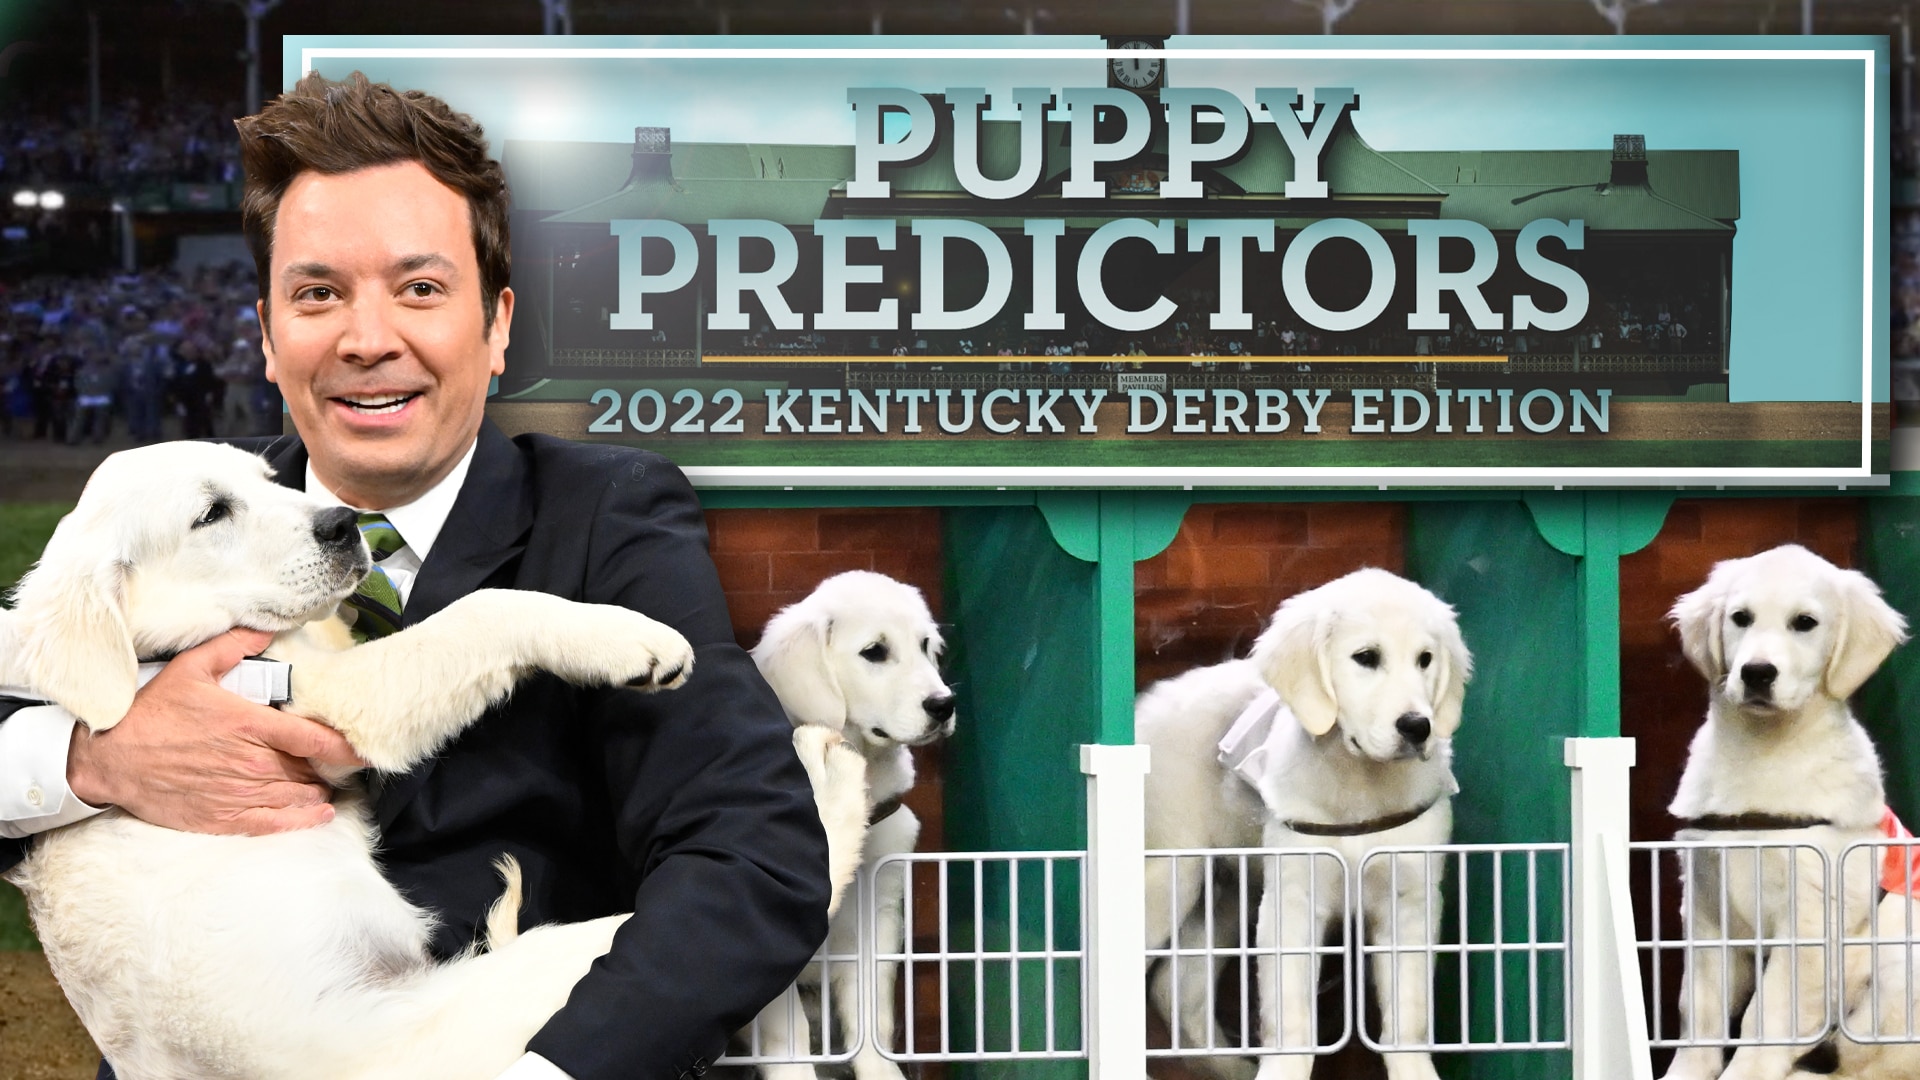 Watch The Tonight Show Starring Jimmy Fallon Highlight Puppies Predict